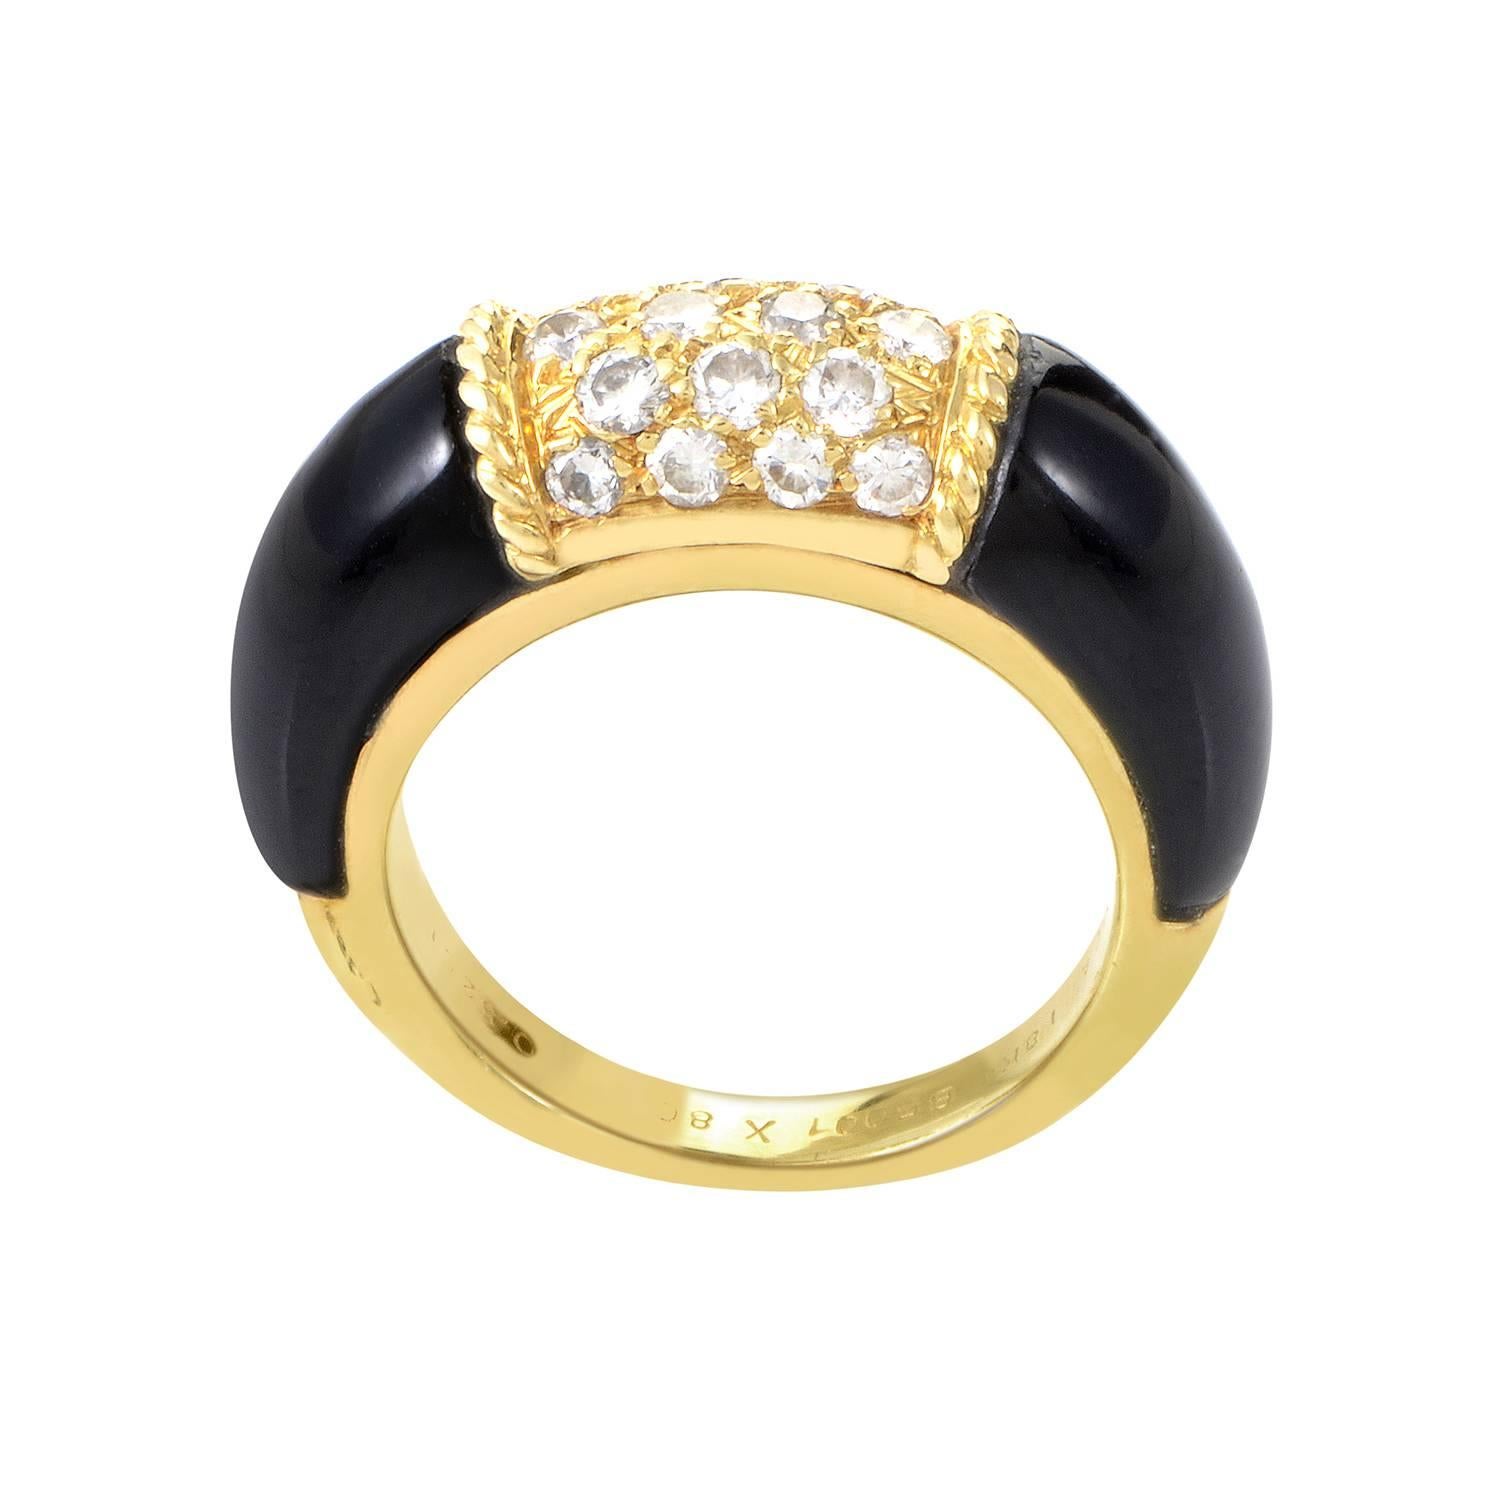 Van Cleef & Arpels has created a ring of contrasting charms. The 18K Yellow Gold rises from a graceful taper. Its turn is sharply cast in the smooth cuts of onyx which converge on the cresting glare of diamonds. A gorgeous ring design from a top